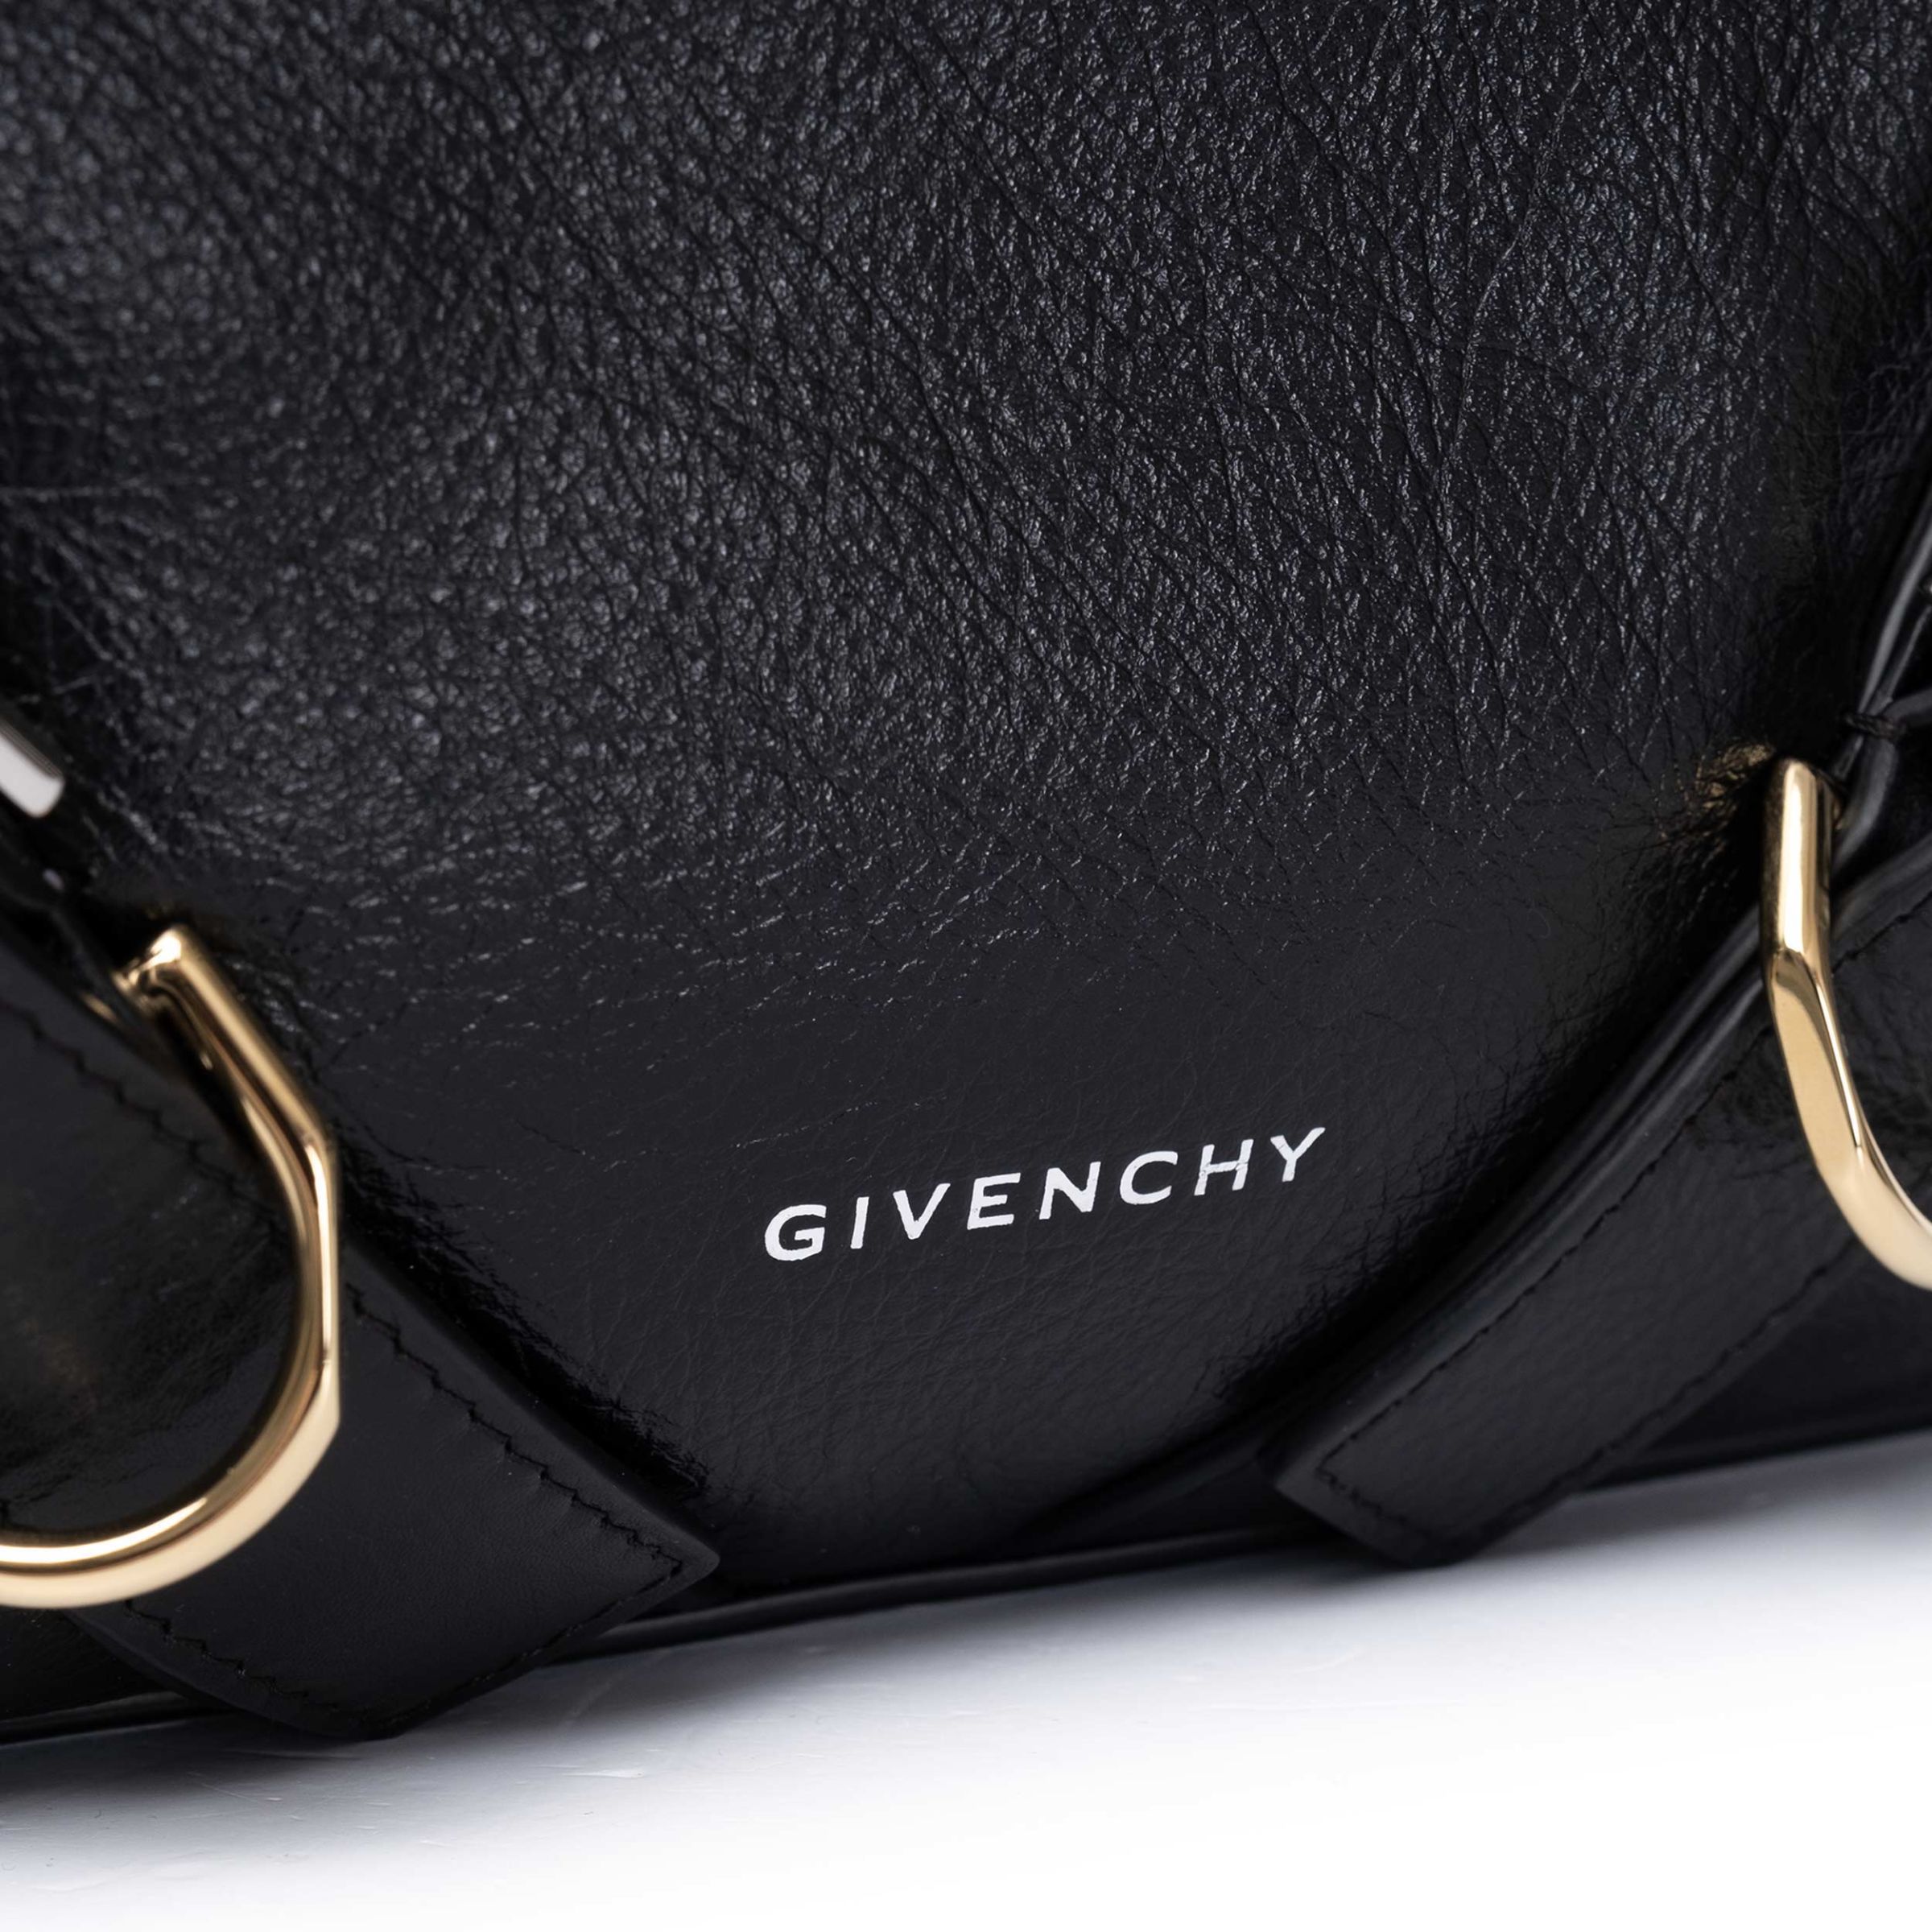 Сумка Givenchy Voyou чорна